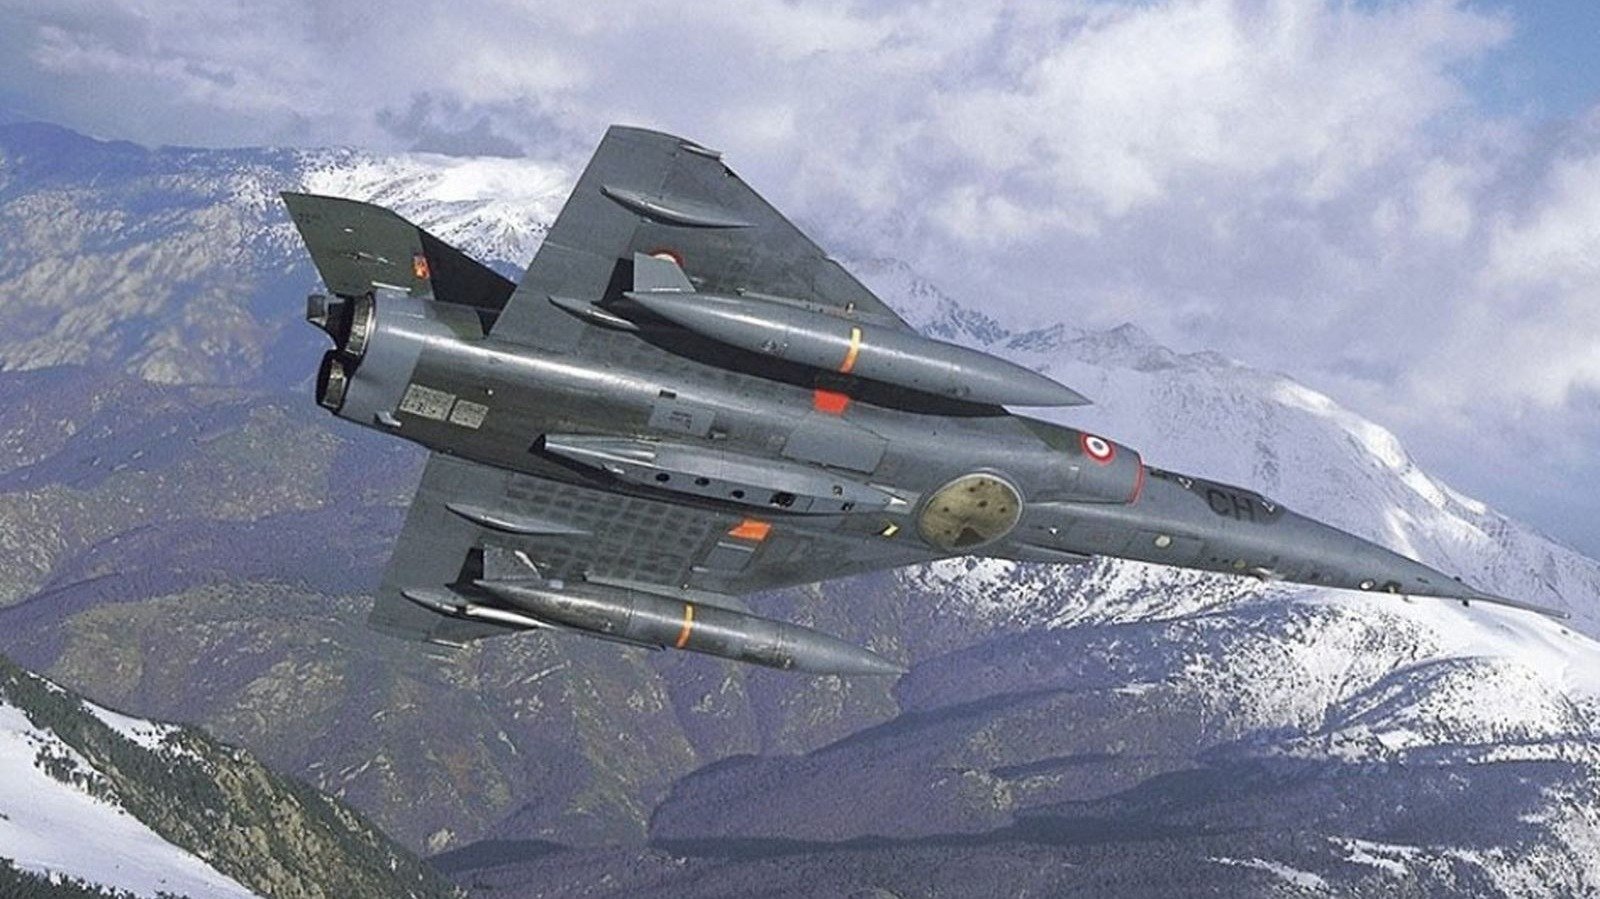 The Mirage IV: France's Nuclear Bomber With 12 Solid-Fuel Rockets